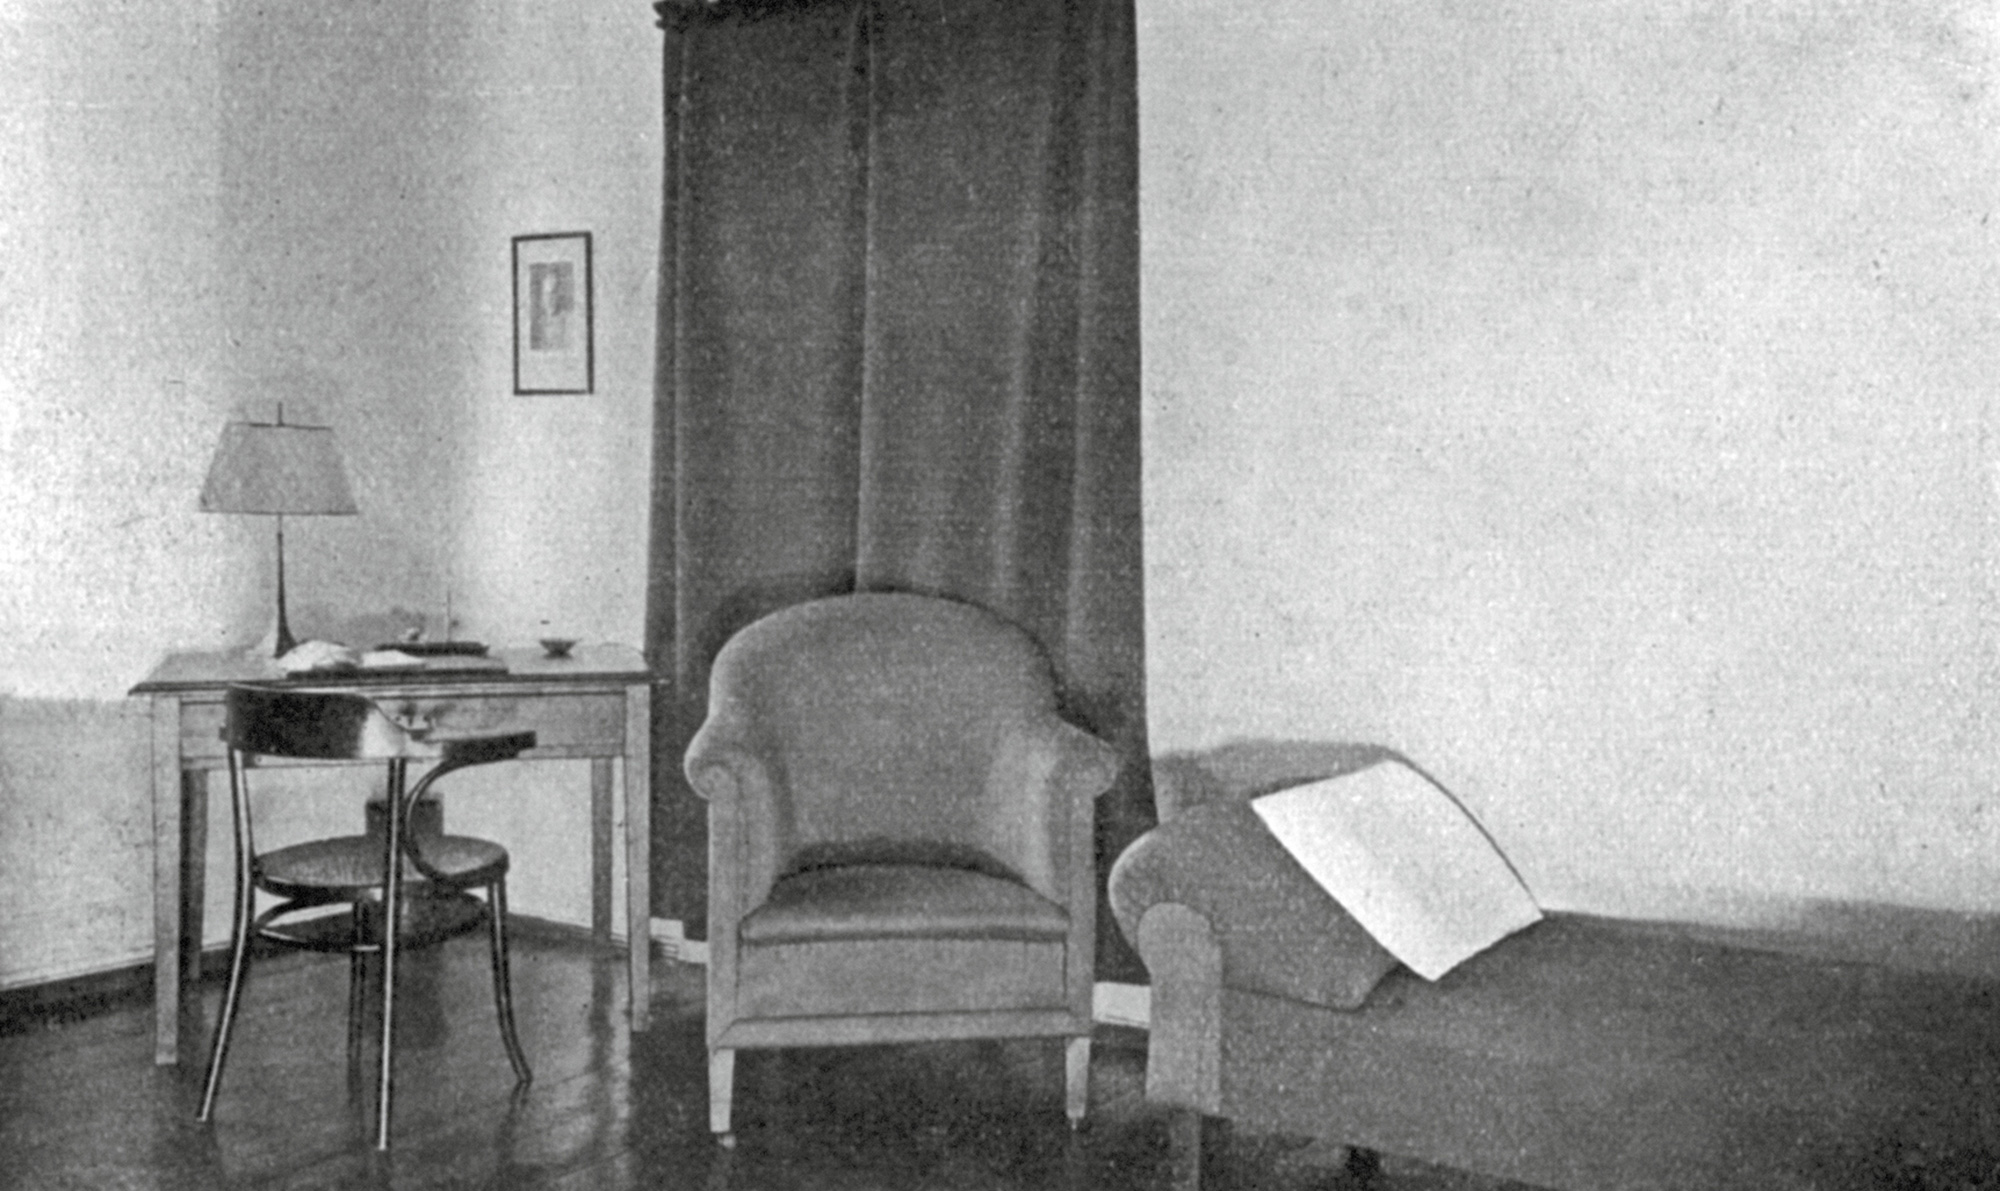 A photograph of the consulting room designed by Freud for the relocated Berlin polyclinic.